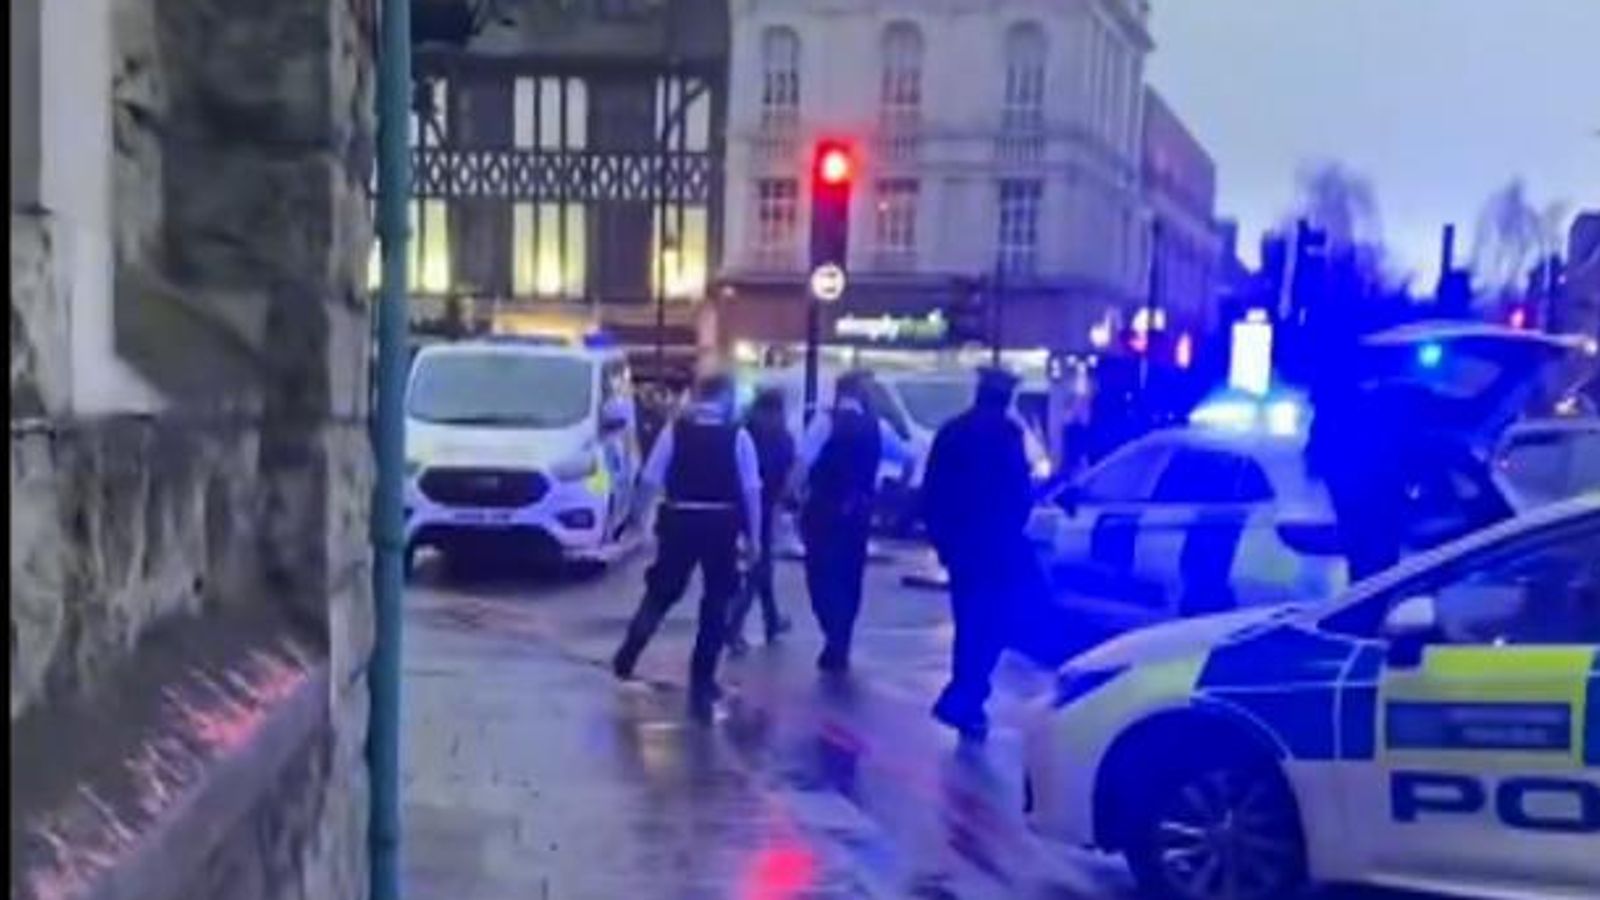 Clapham shooting: Teen charged after shotgun dropped during police chase injures two women